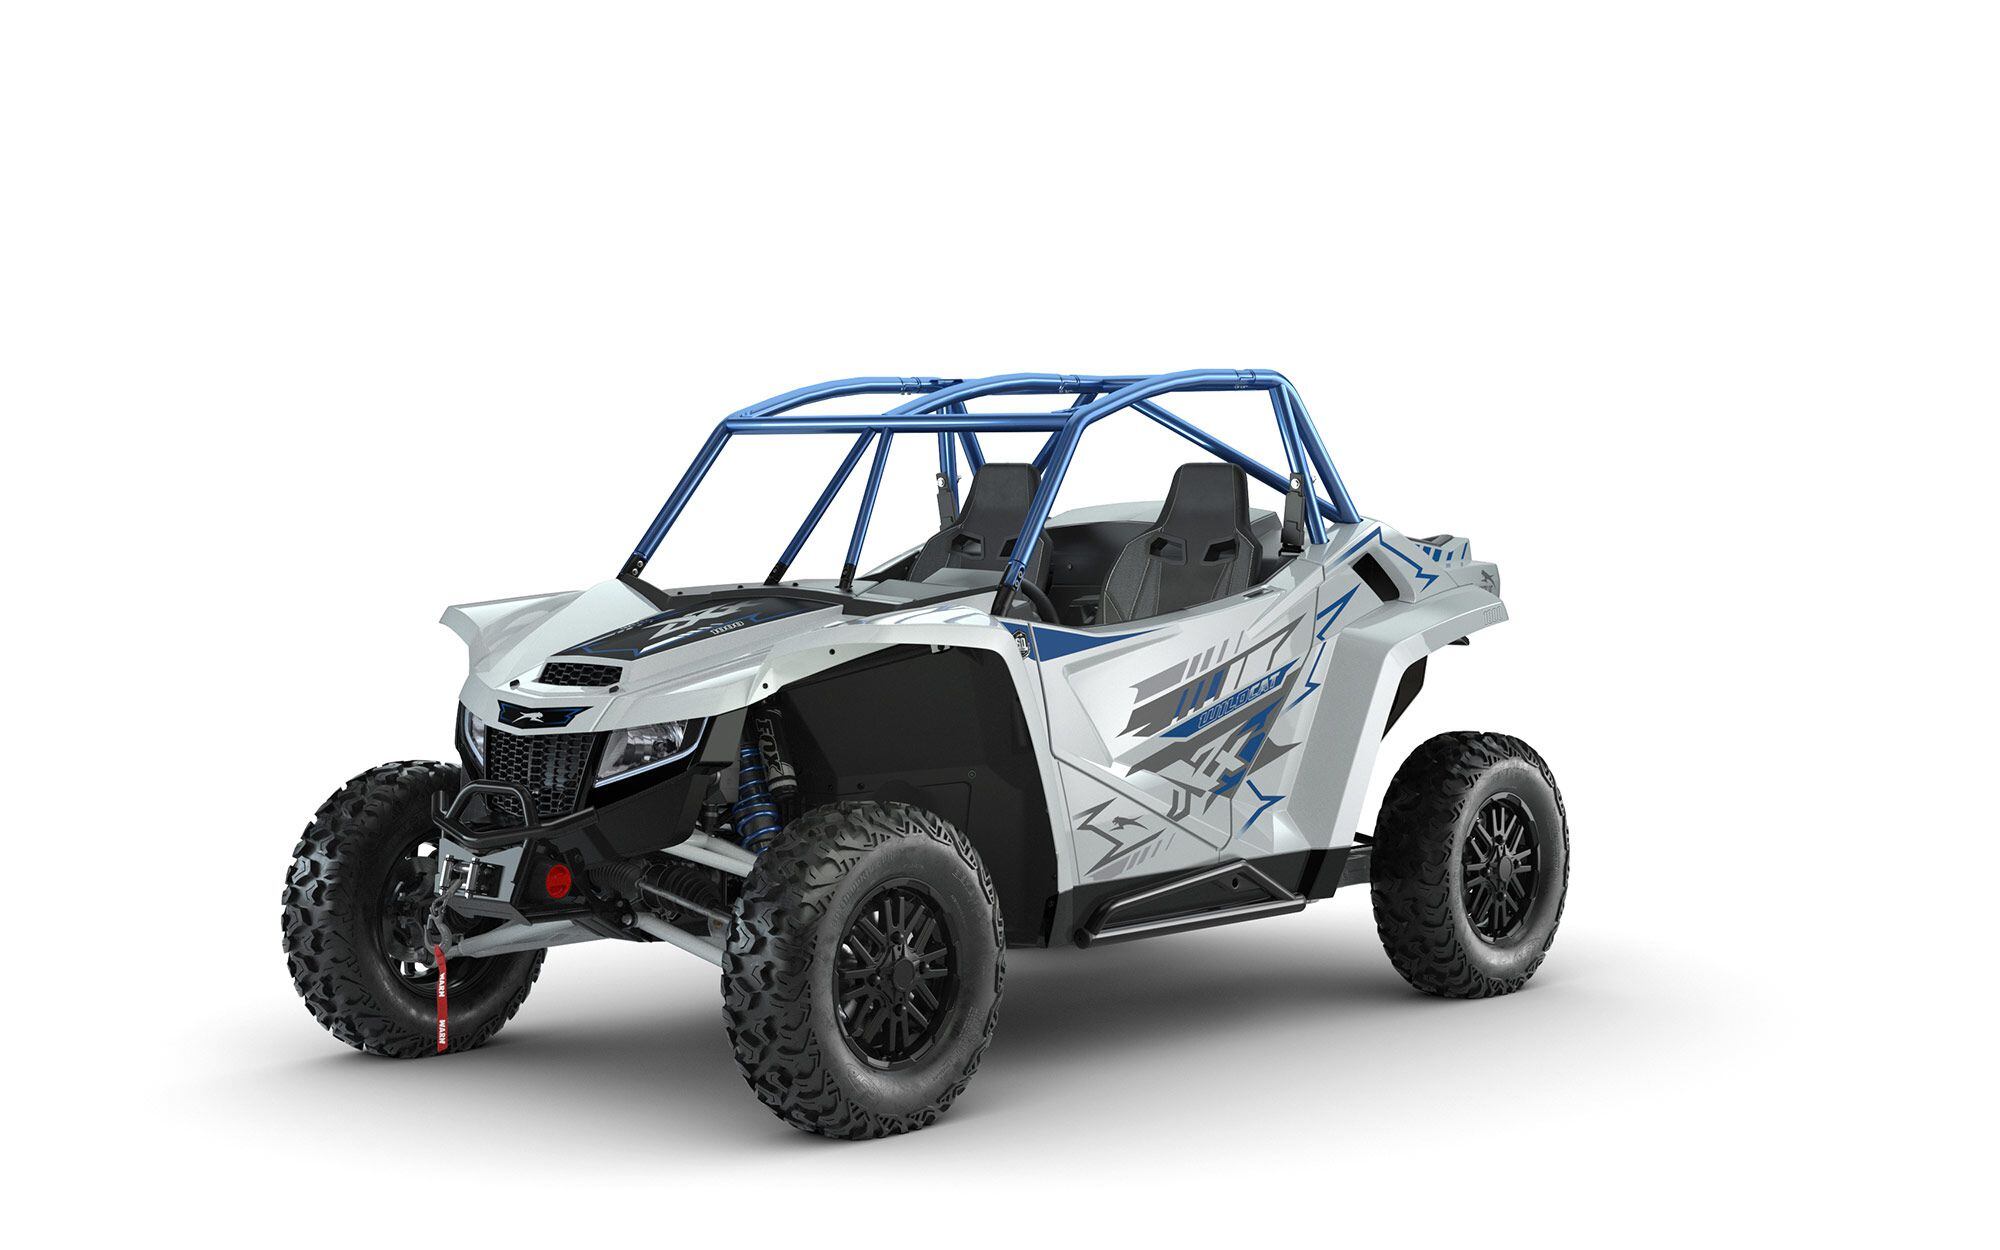 Arctic Cat’s Wildcat XX is a smooth-riding and spacious UTV with an all-new clutch setup for 2022.